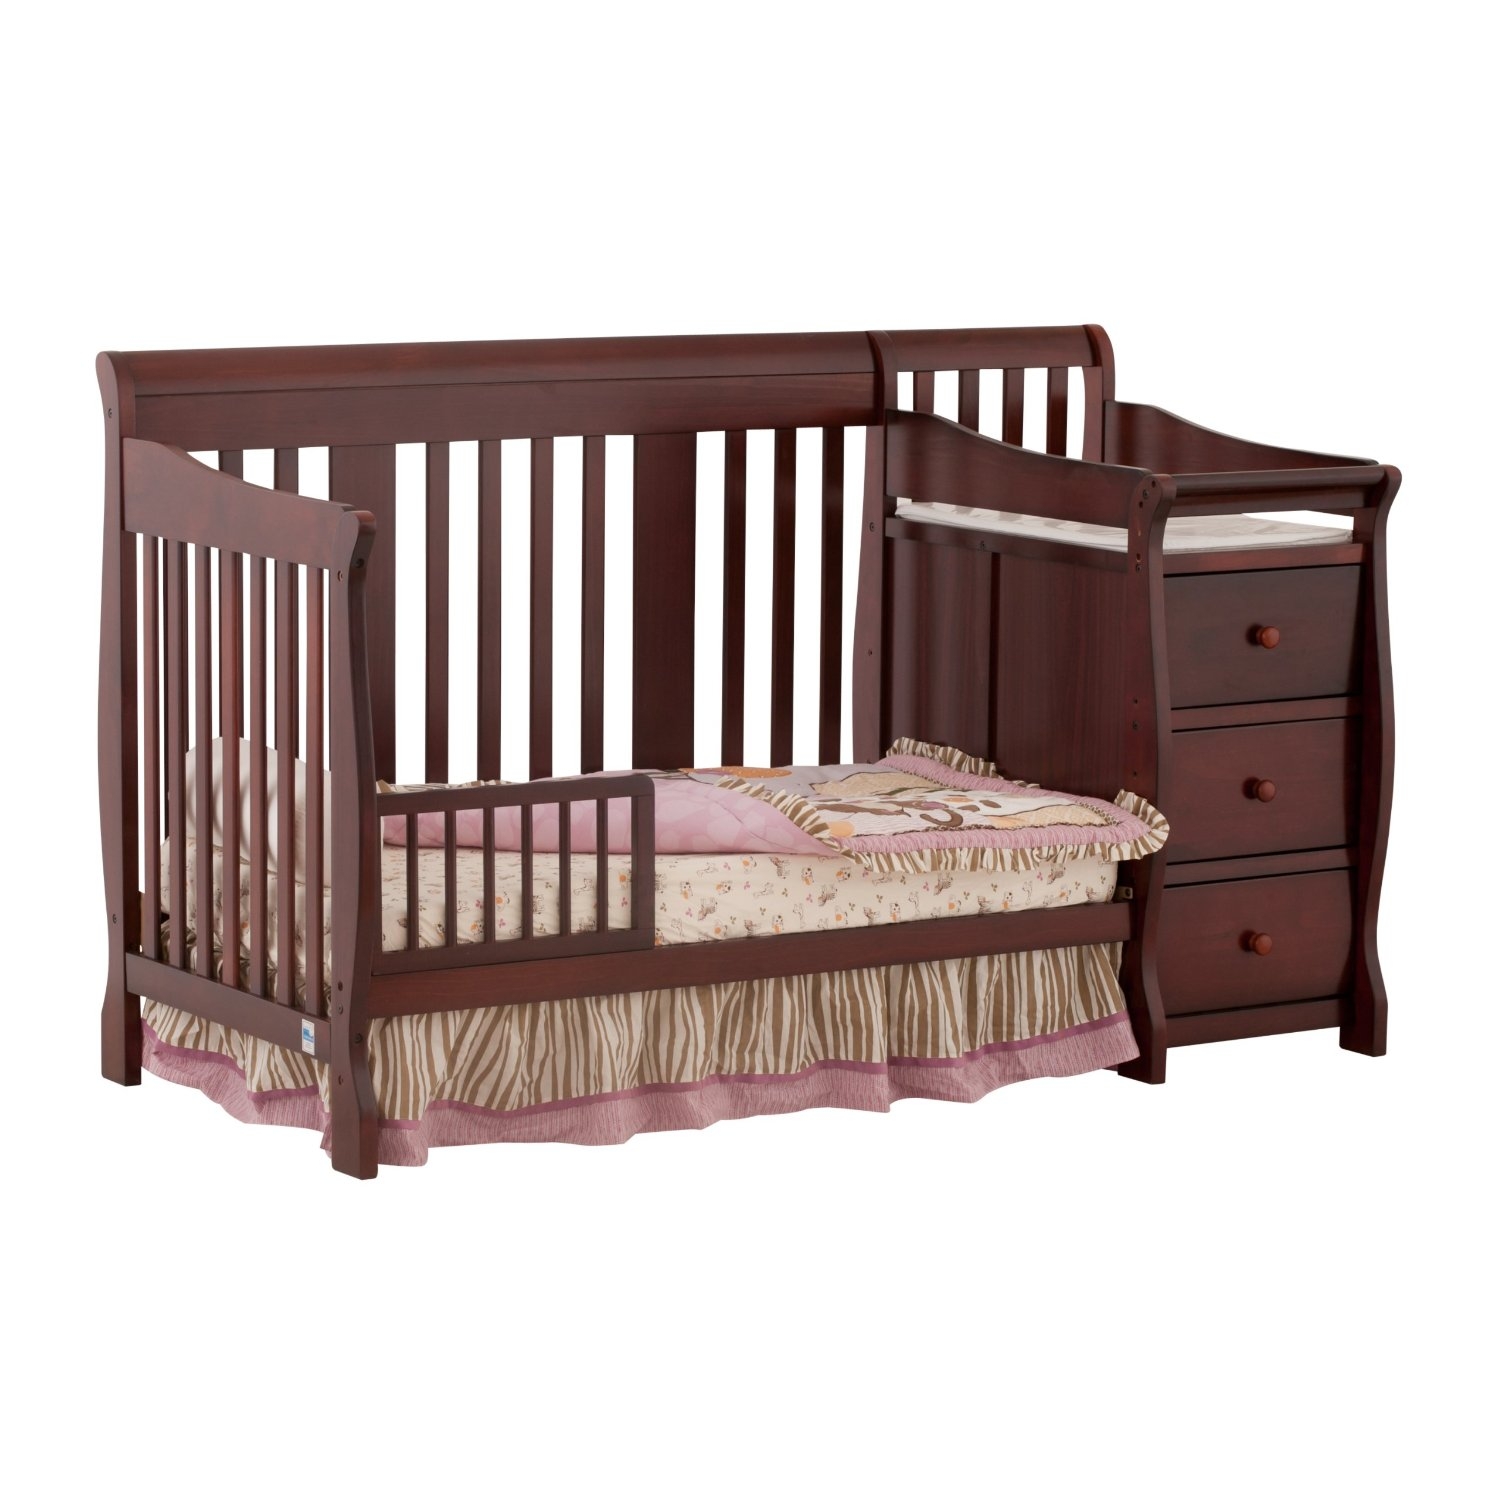 Convertible toddler bed to twin bed 13